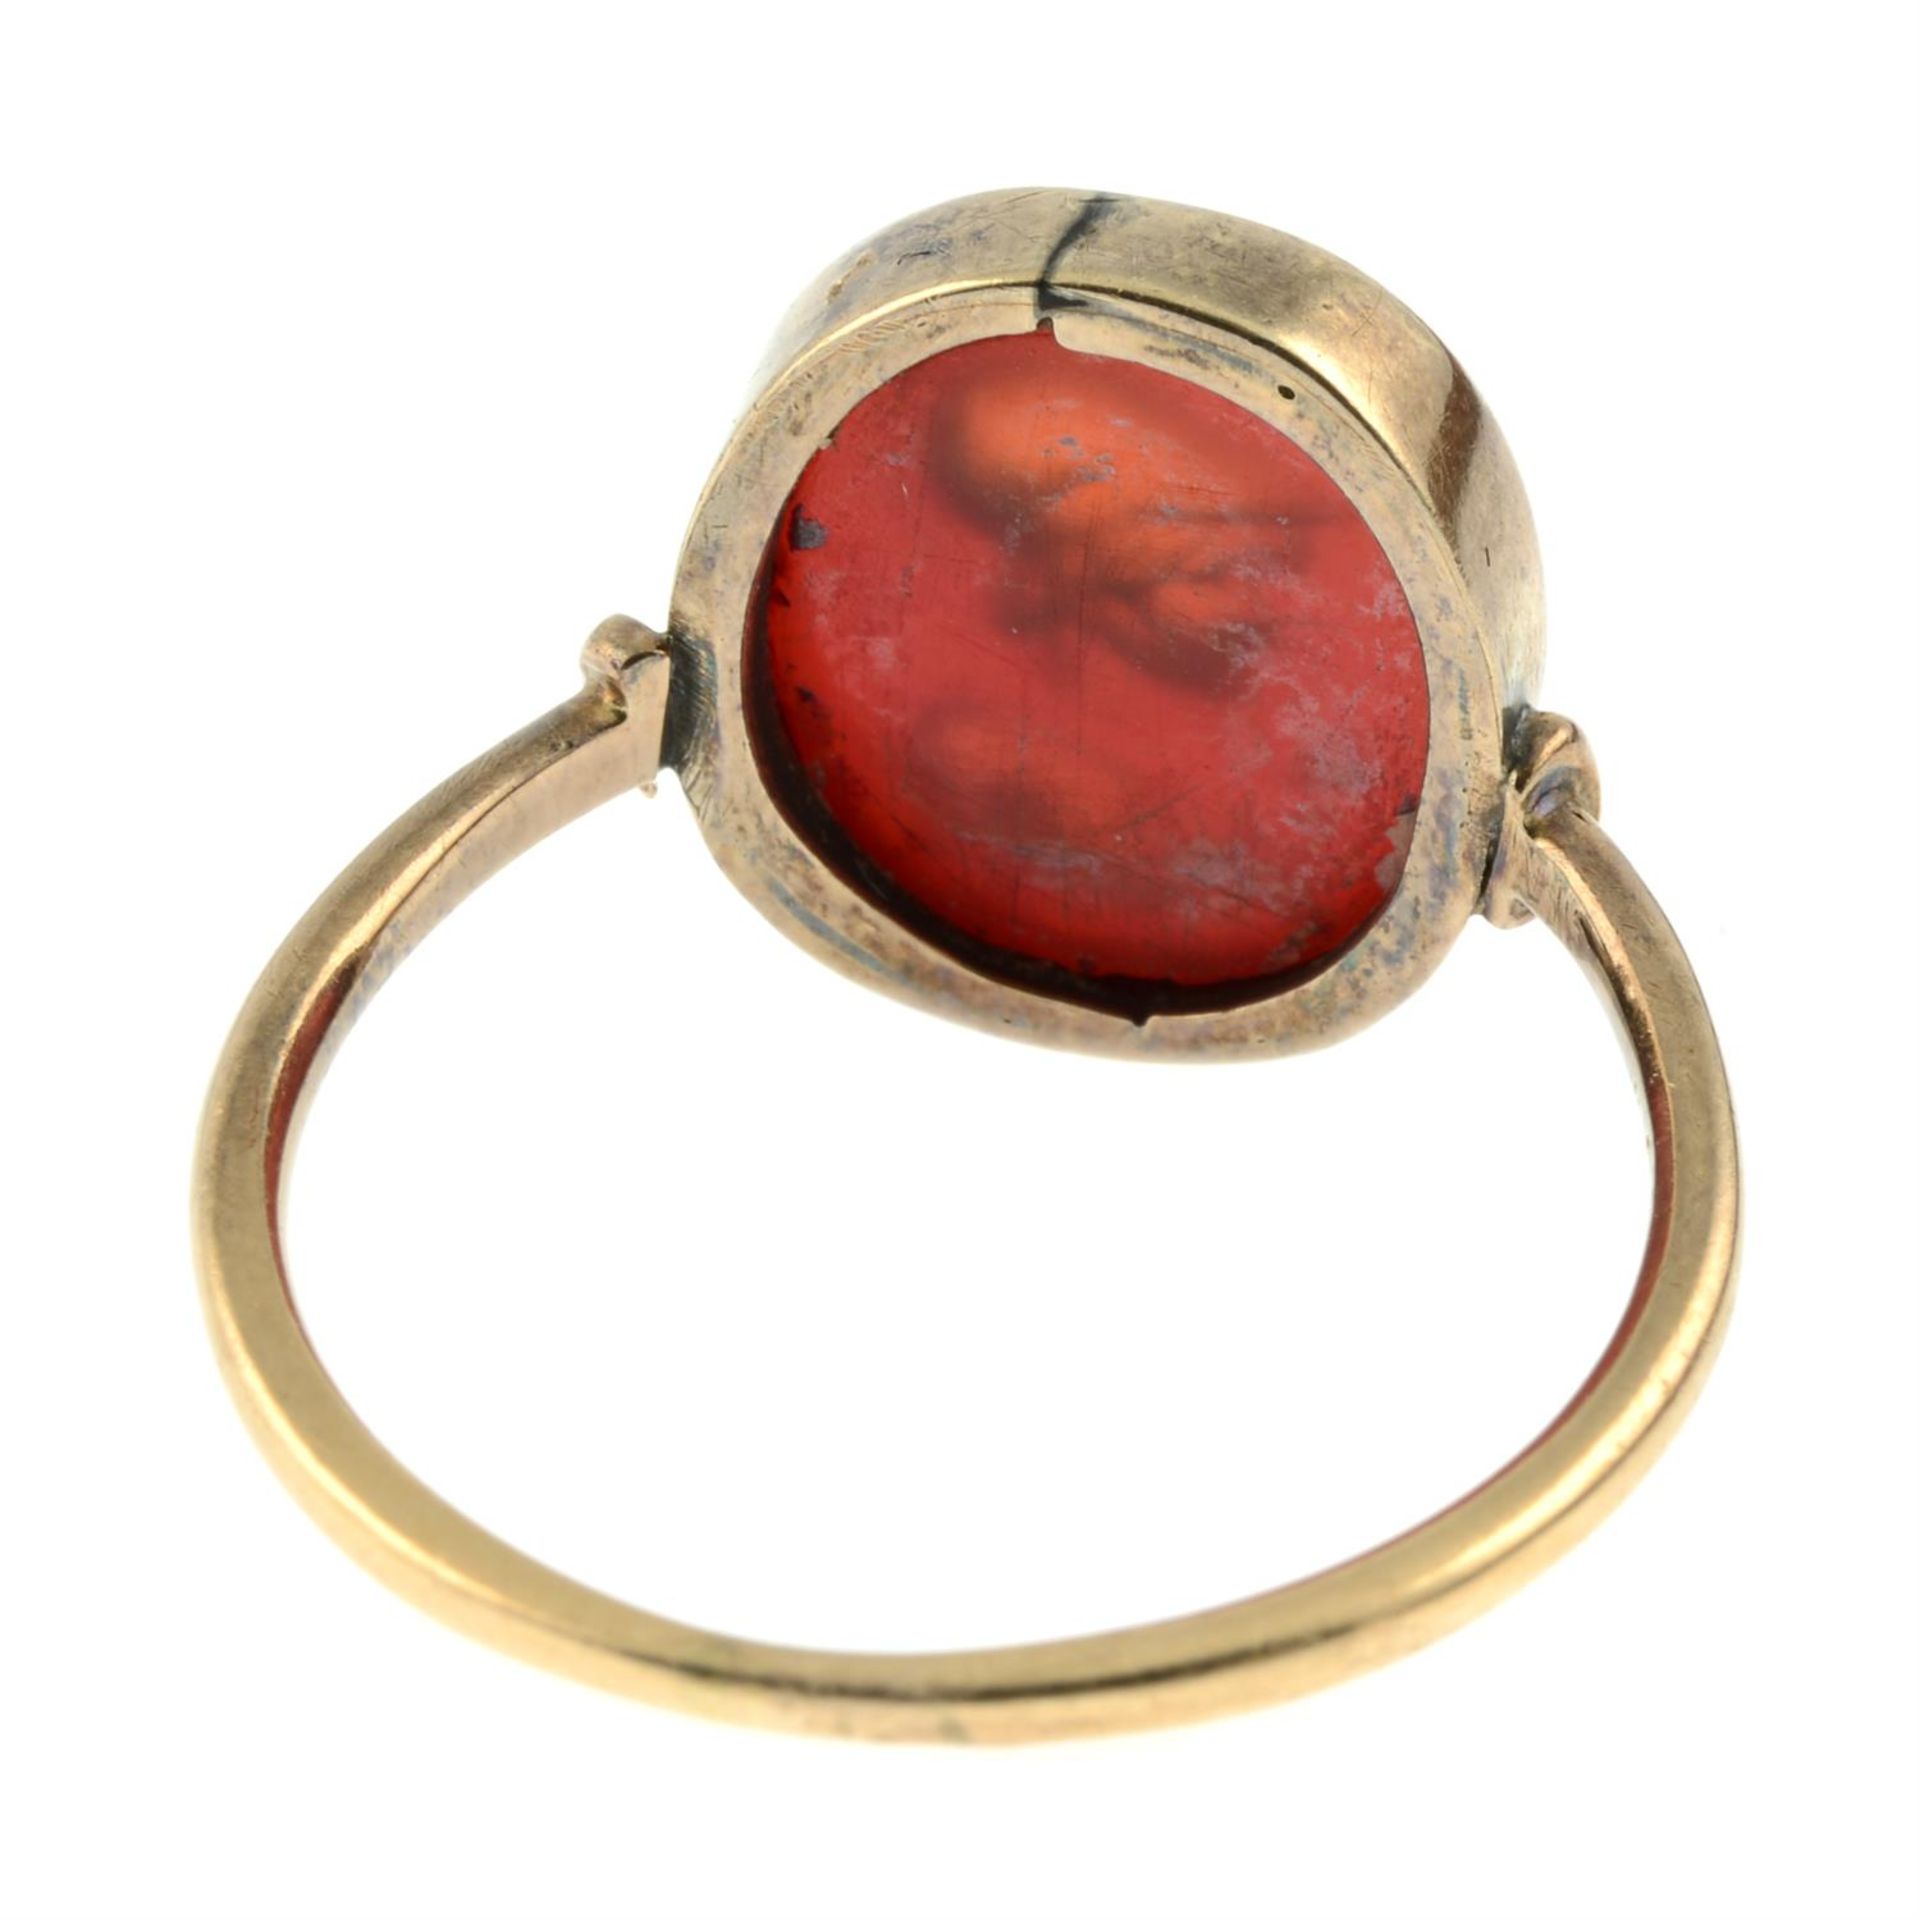 A 19th century gold carnelian intaglio ring, carved to depict Athena with owl attribute. - Image 4 of 5